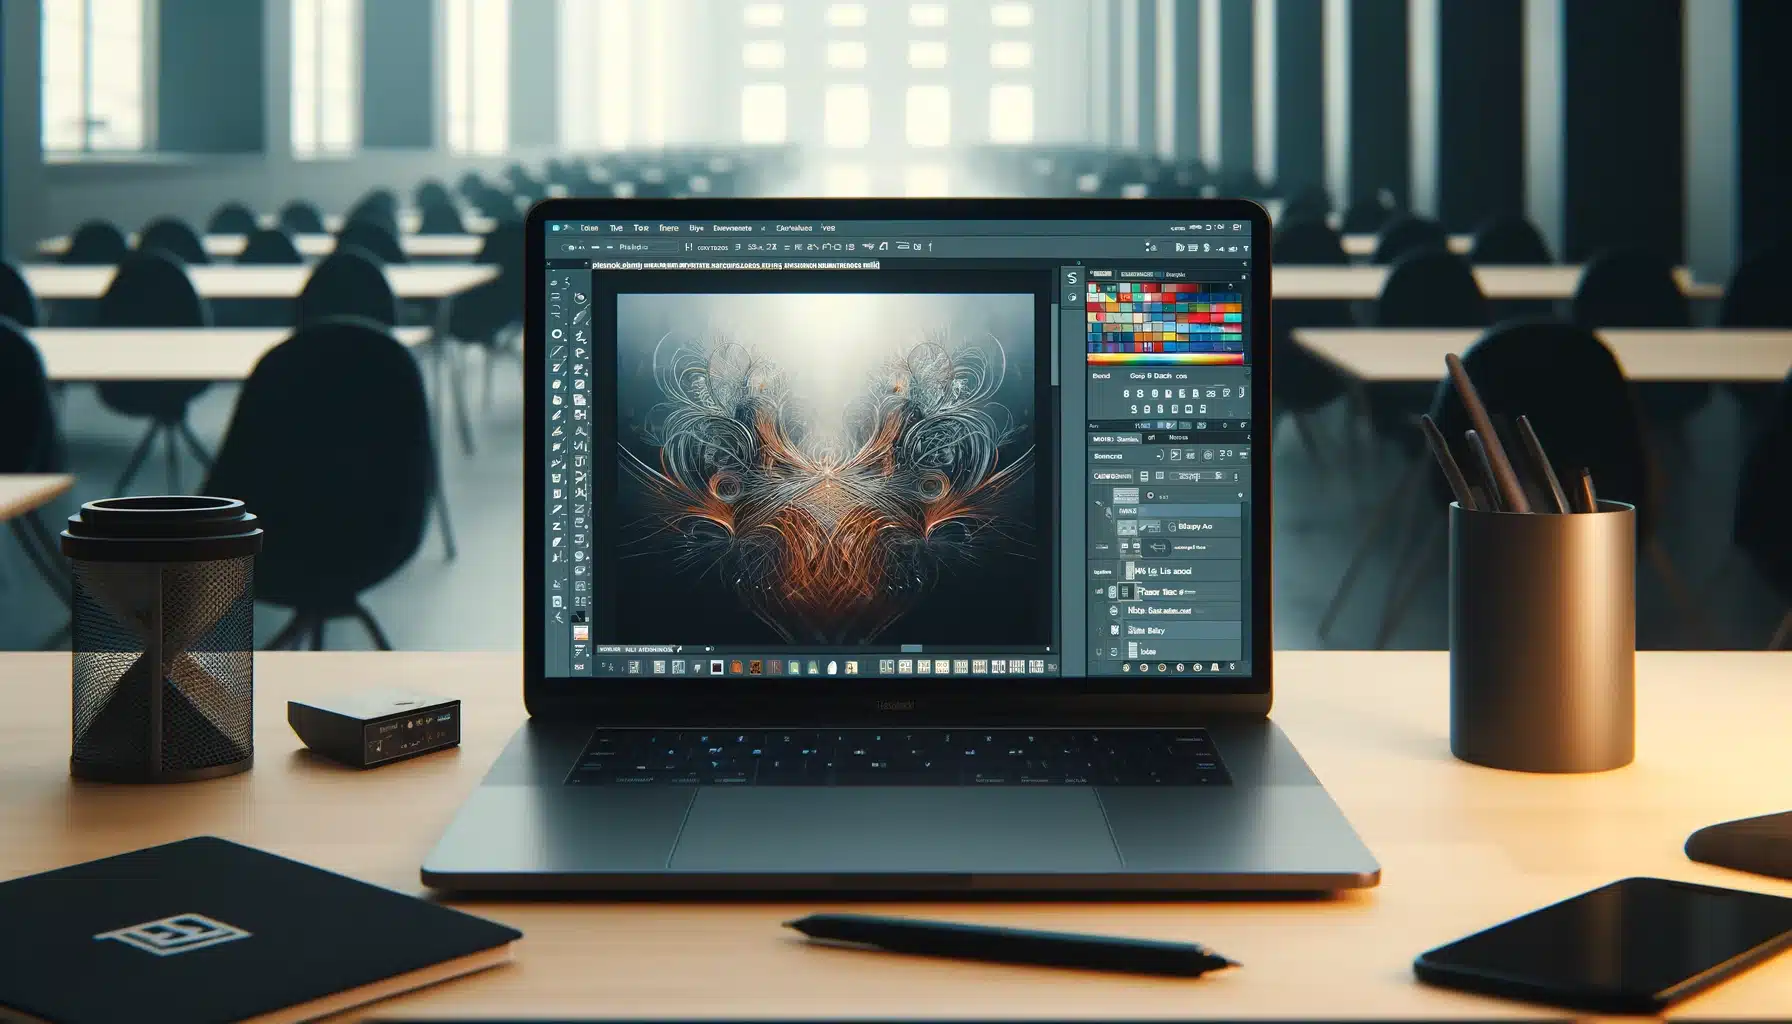 Laptop on a desk with Photoshop displaying Smart Filters, showcasing advanced image editing.